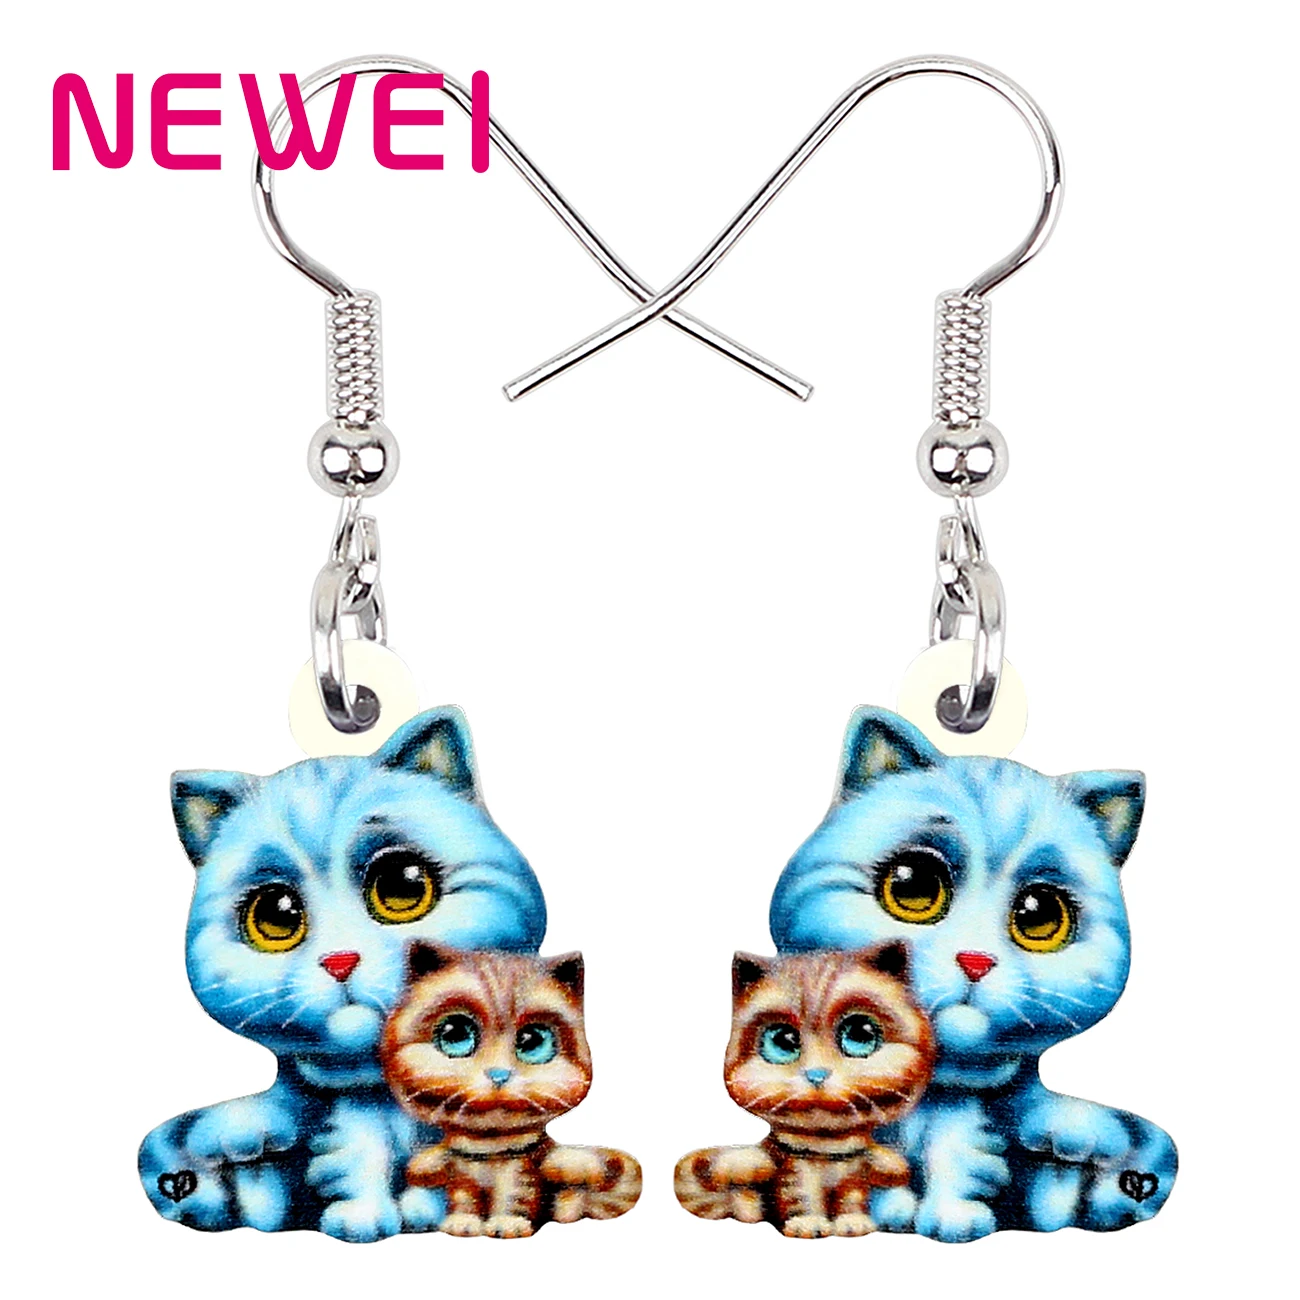 

Mothers Day Acrylic Mother Child Lovely Kitten Cat Earrings Pets Dangle Drop Jewelry For Women Girls Fashion Charms Gifts, Multi color